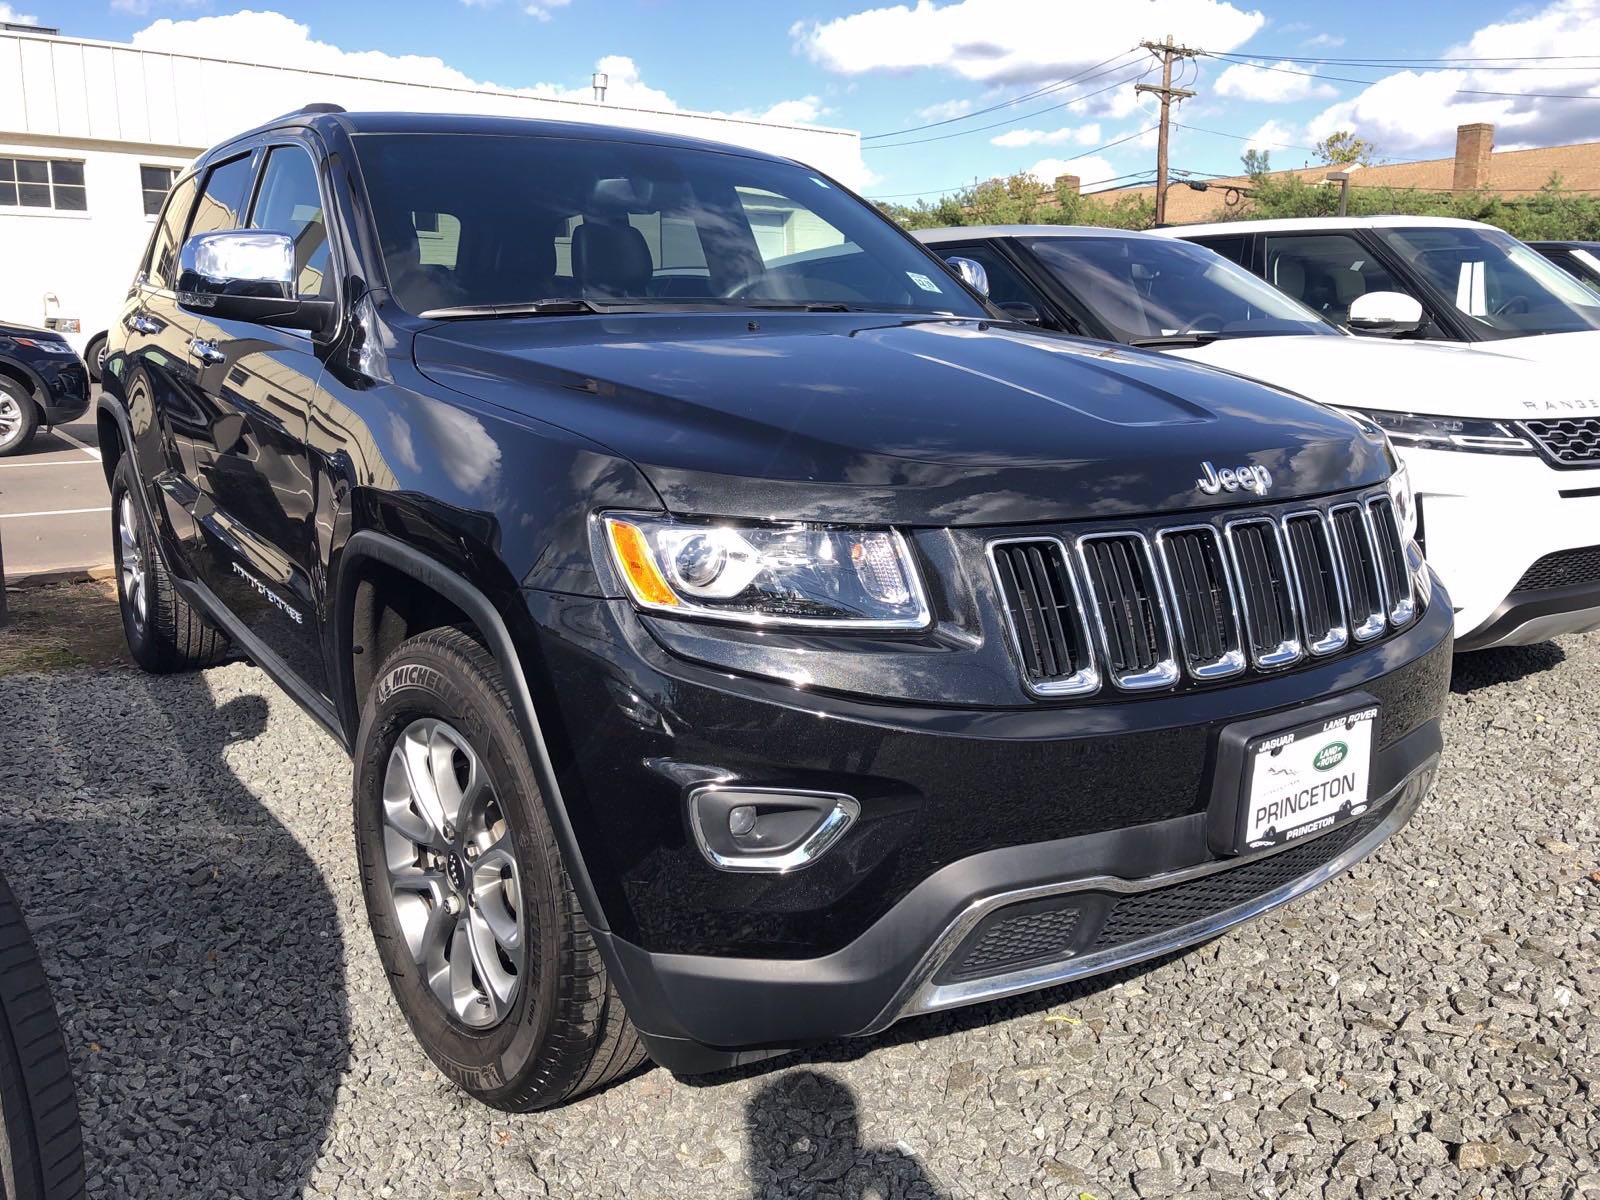 PreOwned 2015 Jeep Grand Cherokee Sport Utility in